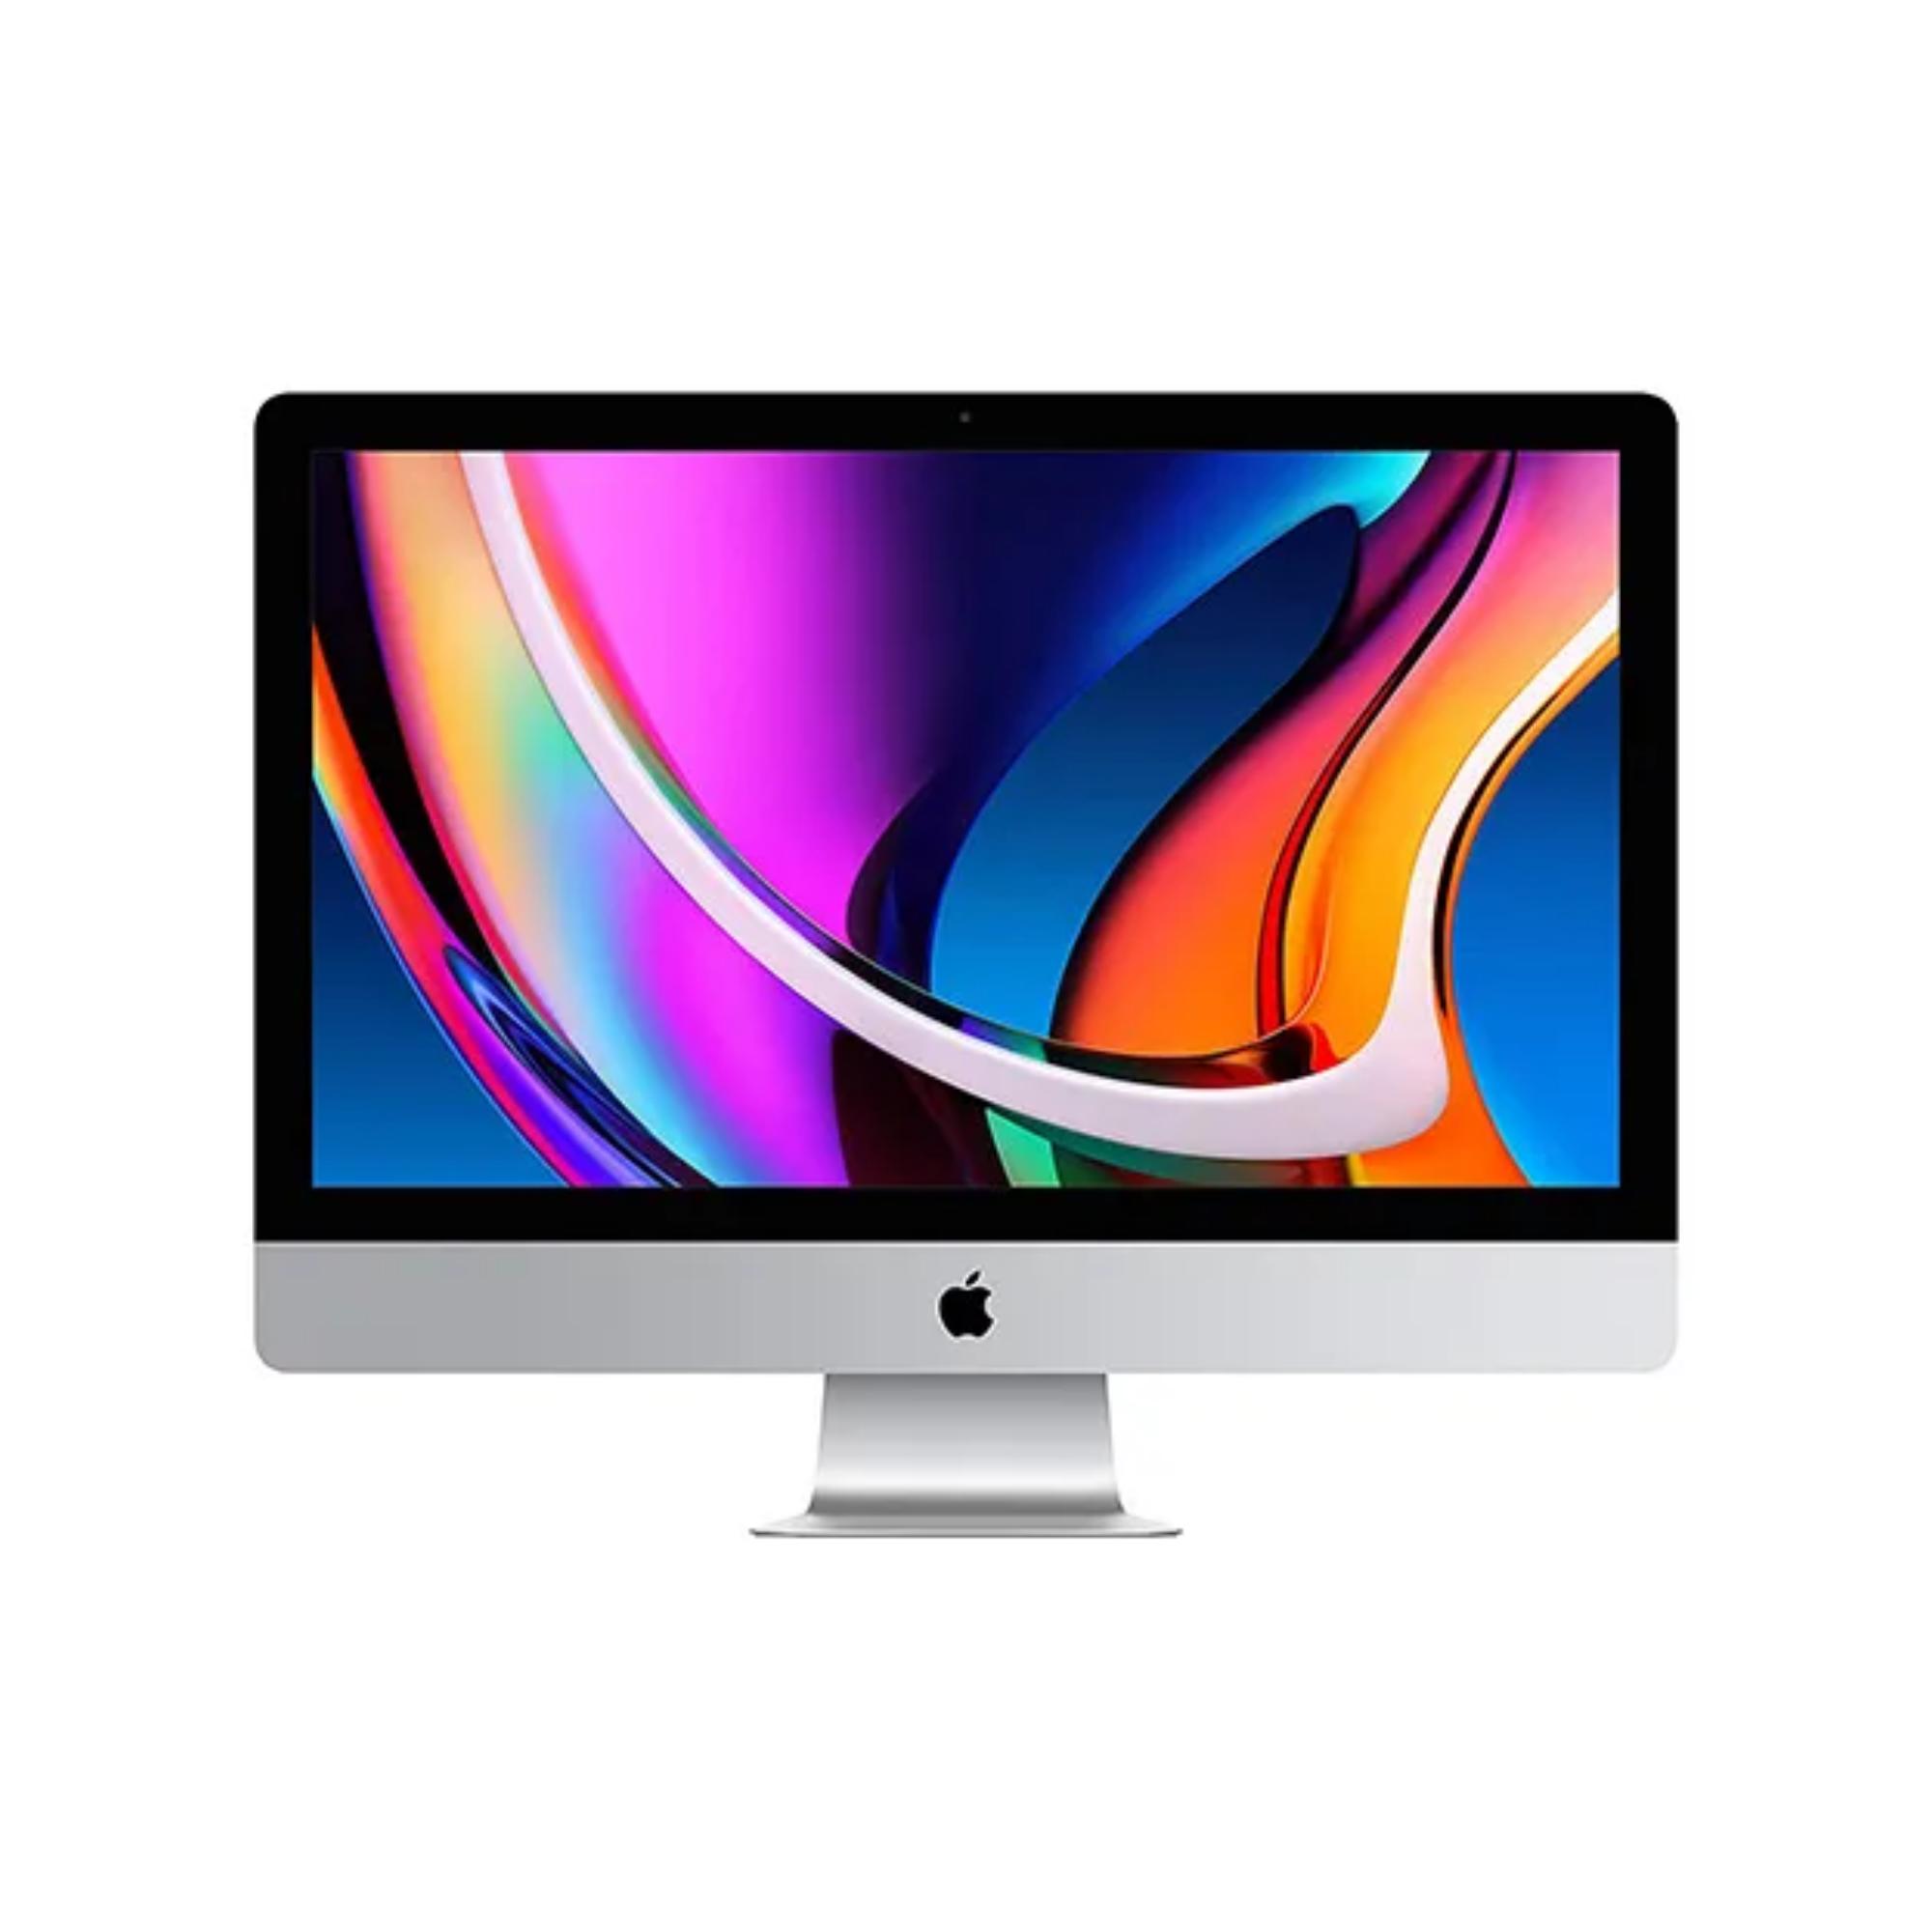 iMac – iMAC 21.5″ MID 2011 INTEL CORE I5 / 2.7 / 8 / 256SSD / AMD6770M-512 – A1311I5-B<br><br><span STYLE="background:#39ac37;"><font color="white"> DISPONIBILE </font></span>